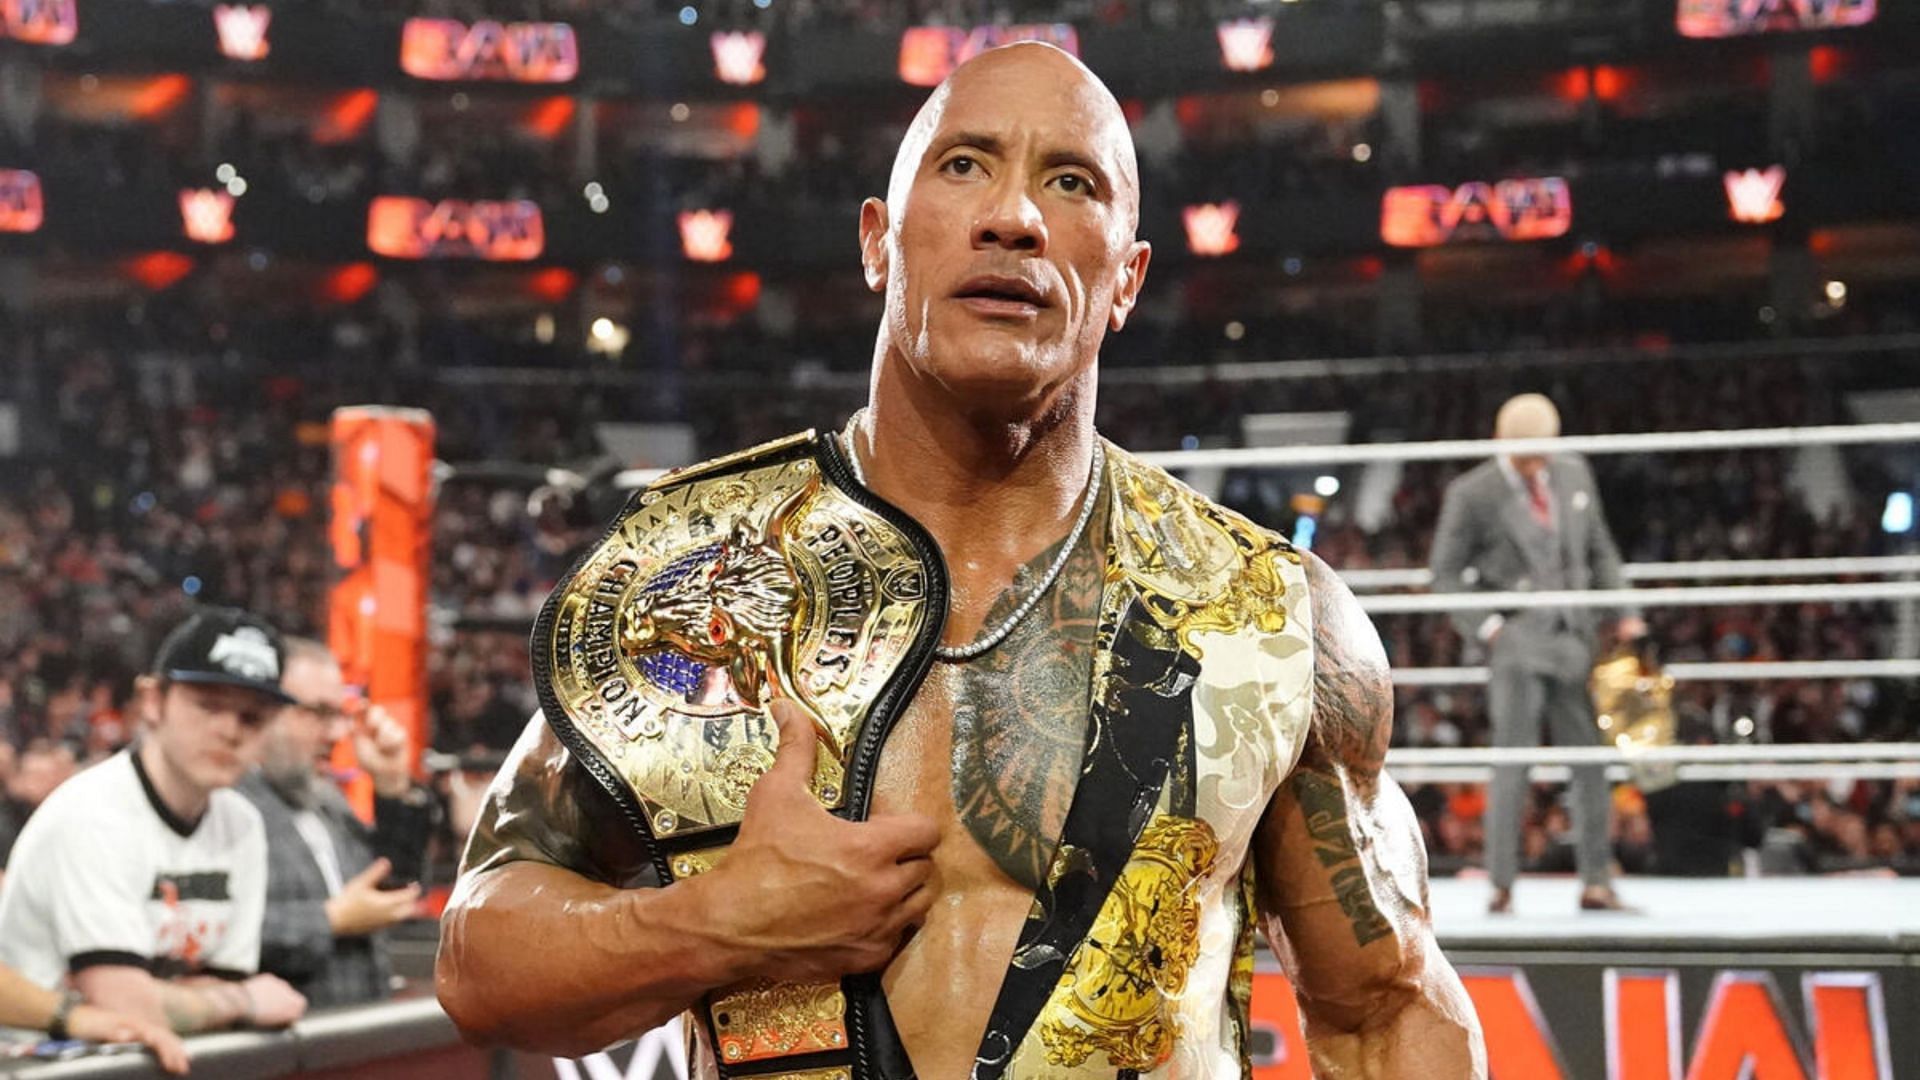 The Rock competed at WWE WrestleMania XL